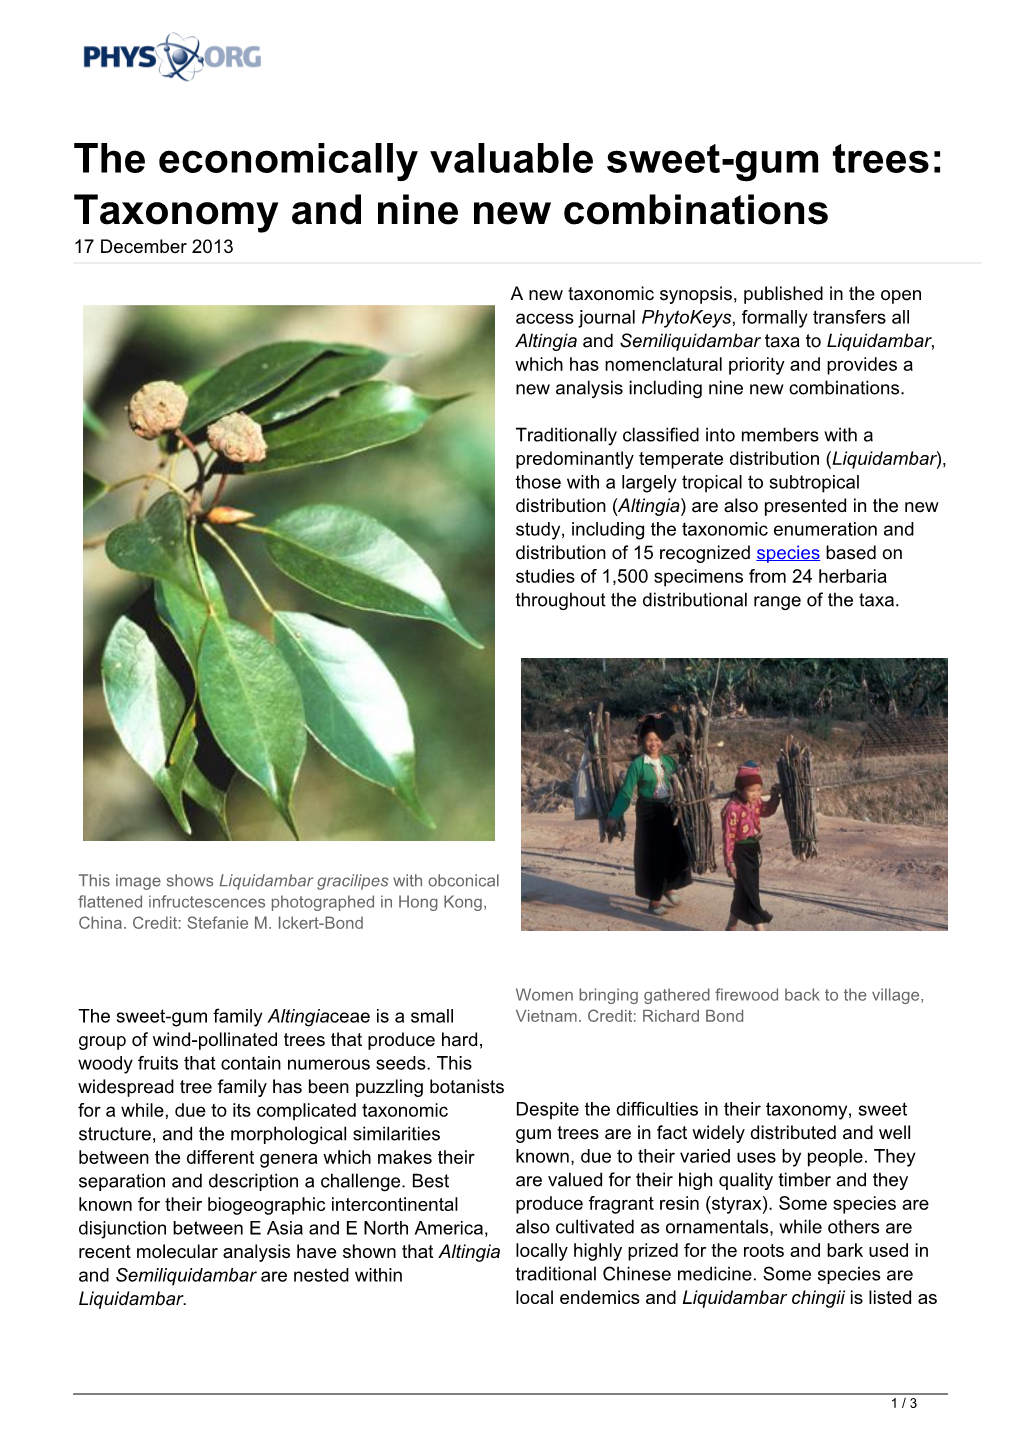 The Economically Valuable Sweet-Gum Trees: Taxonomy and Nine New Combinations 17 December 2013